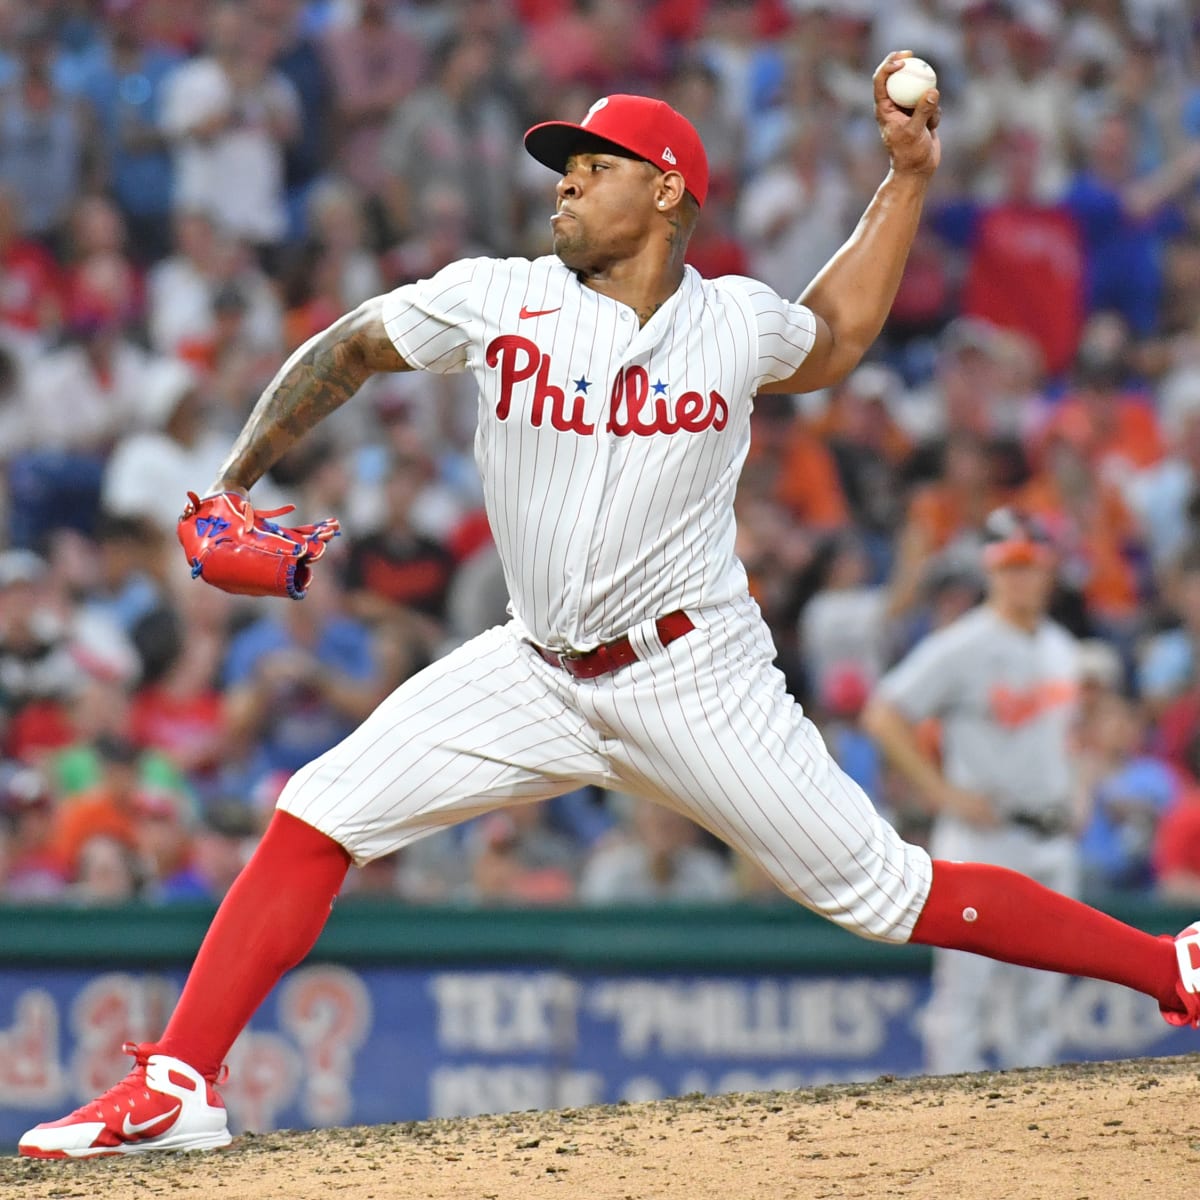 Phillies at Pirates Free Live Stream MLB Online, Channel, Time - How to Watch and Stream Major League and College Sports